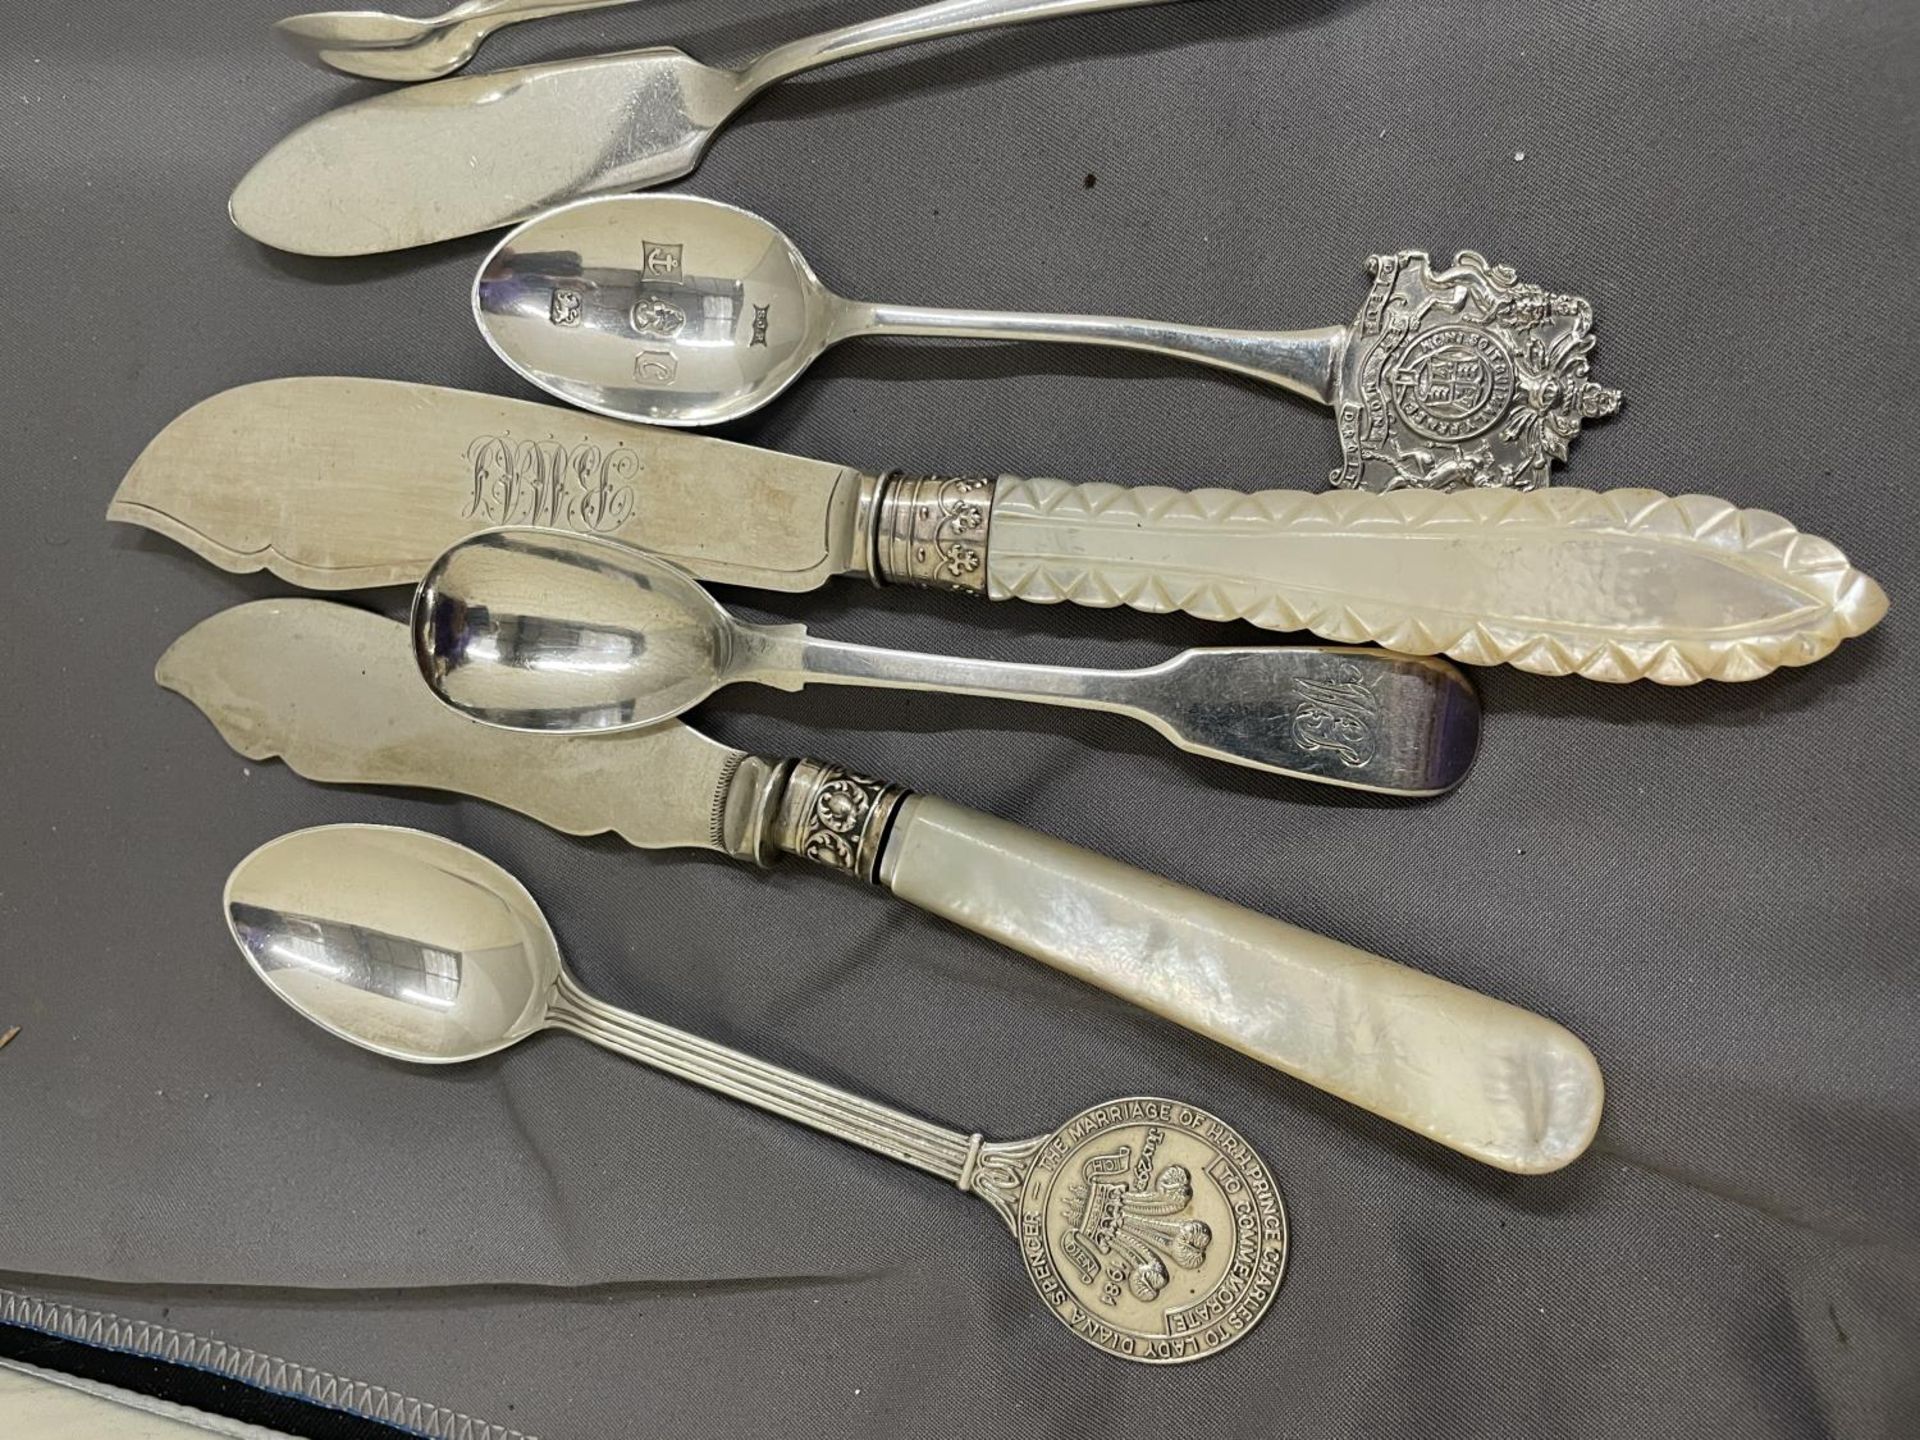 TEN PIECES OF VARIOUS MARKED SILVER ITEMS TO INCLUDE NIPS, FORKS, SPOONS AND KNIVES - Image 5 of 8